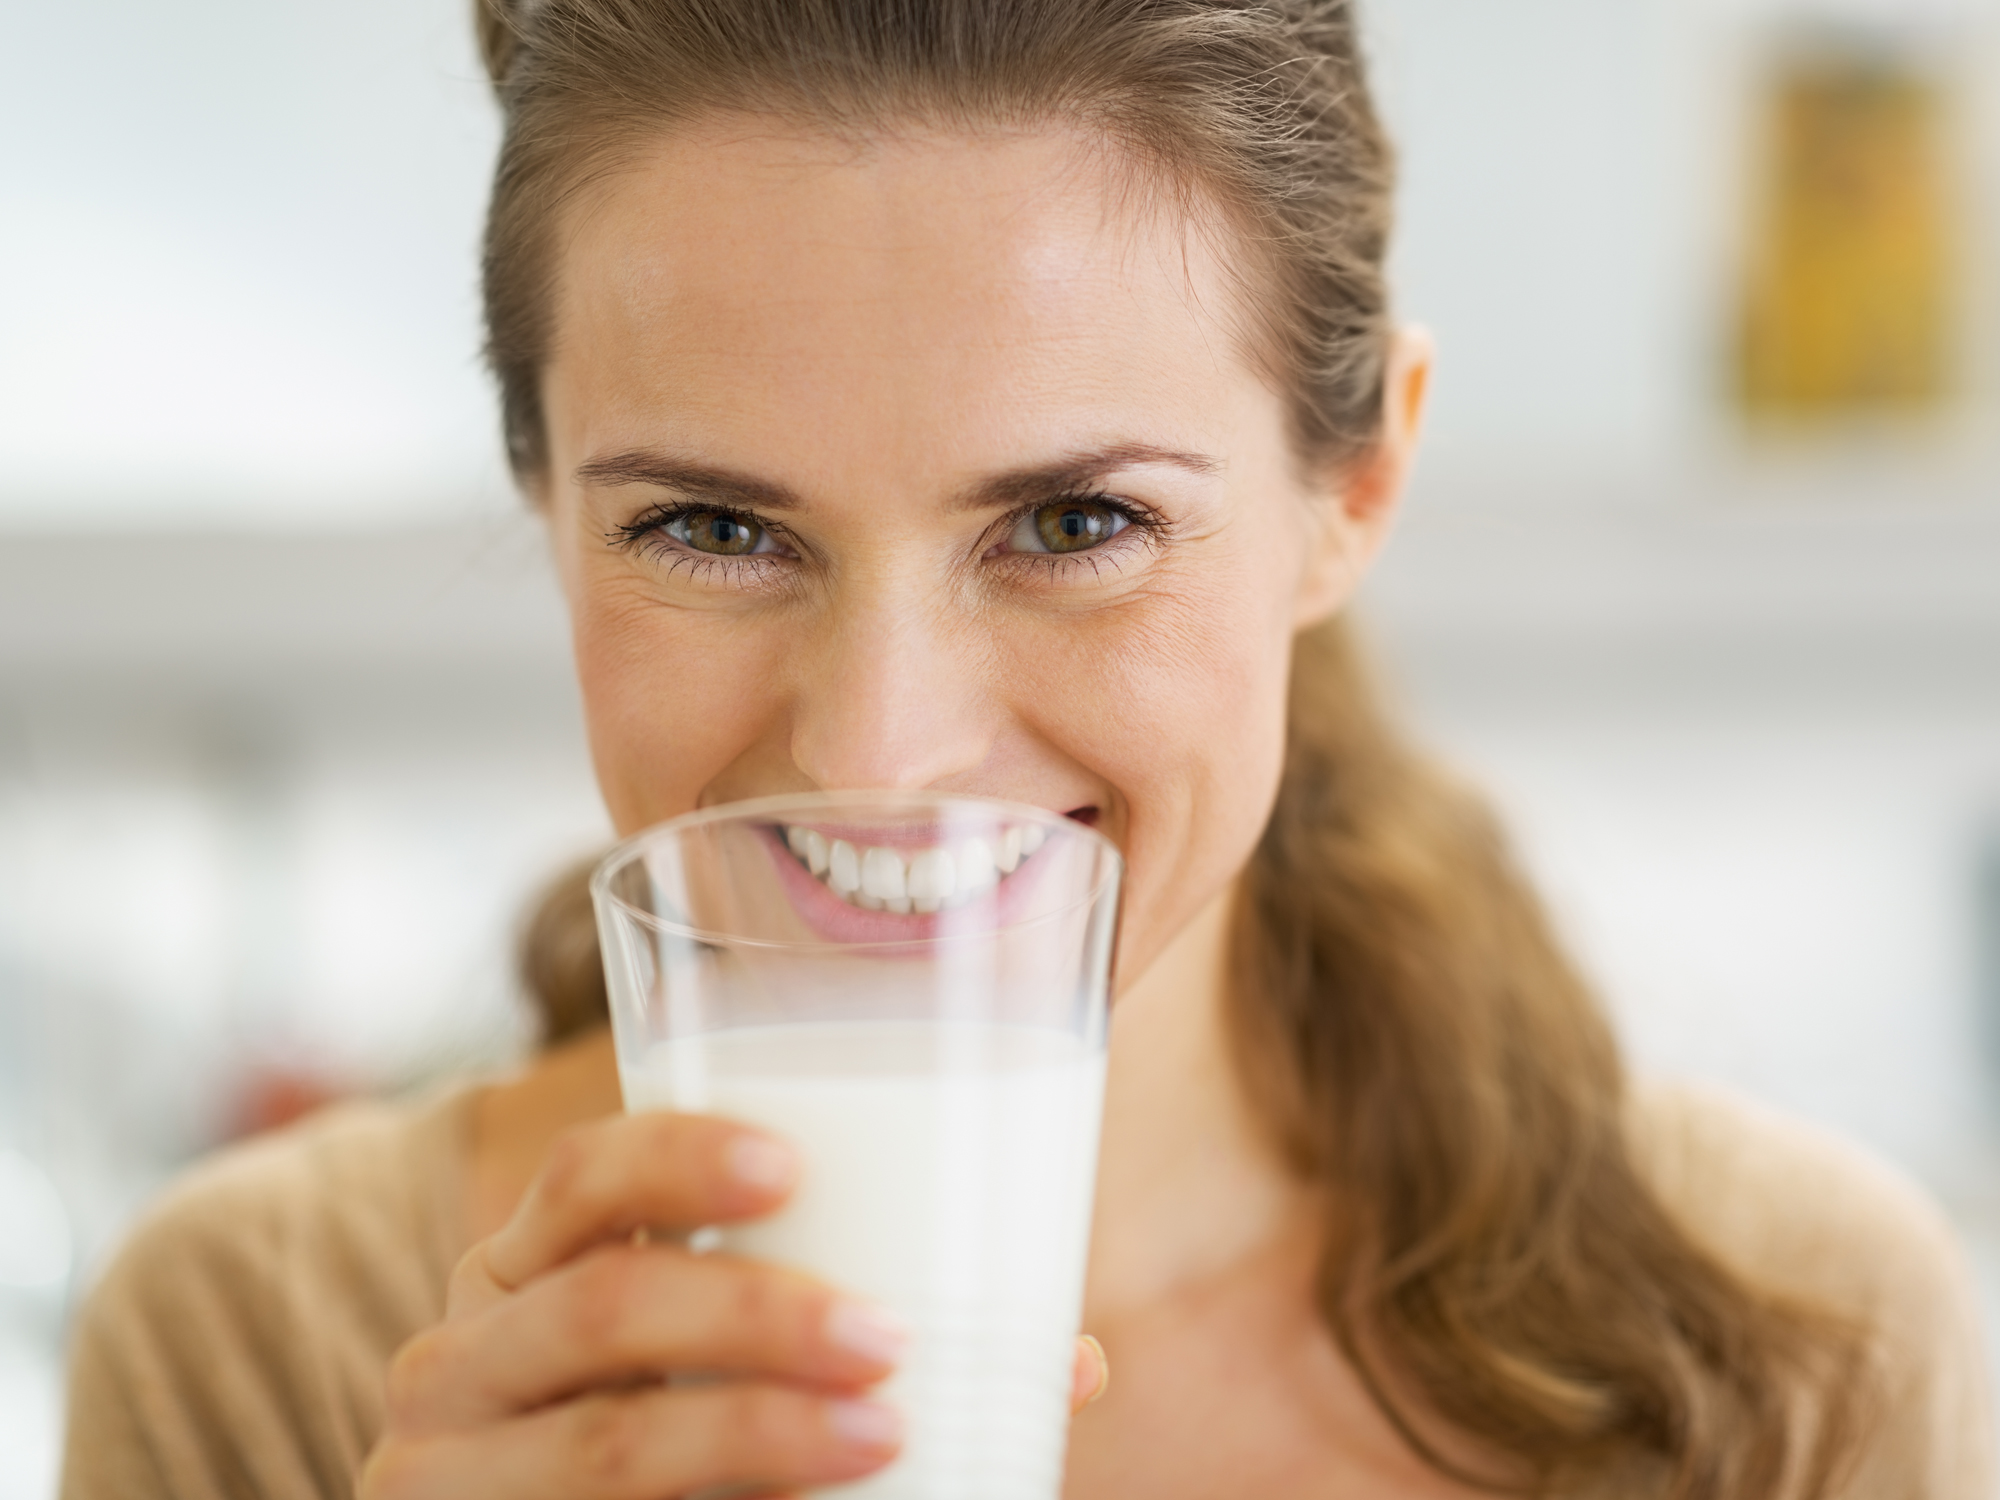 Not a milk-drinker? Your thyroid could be in trouble